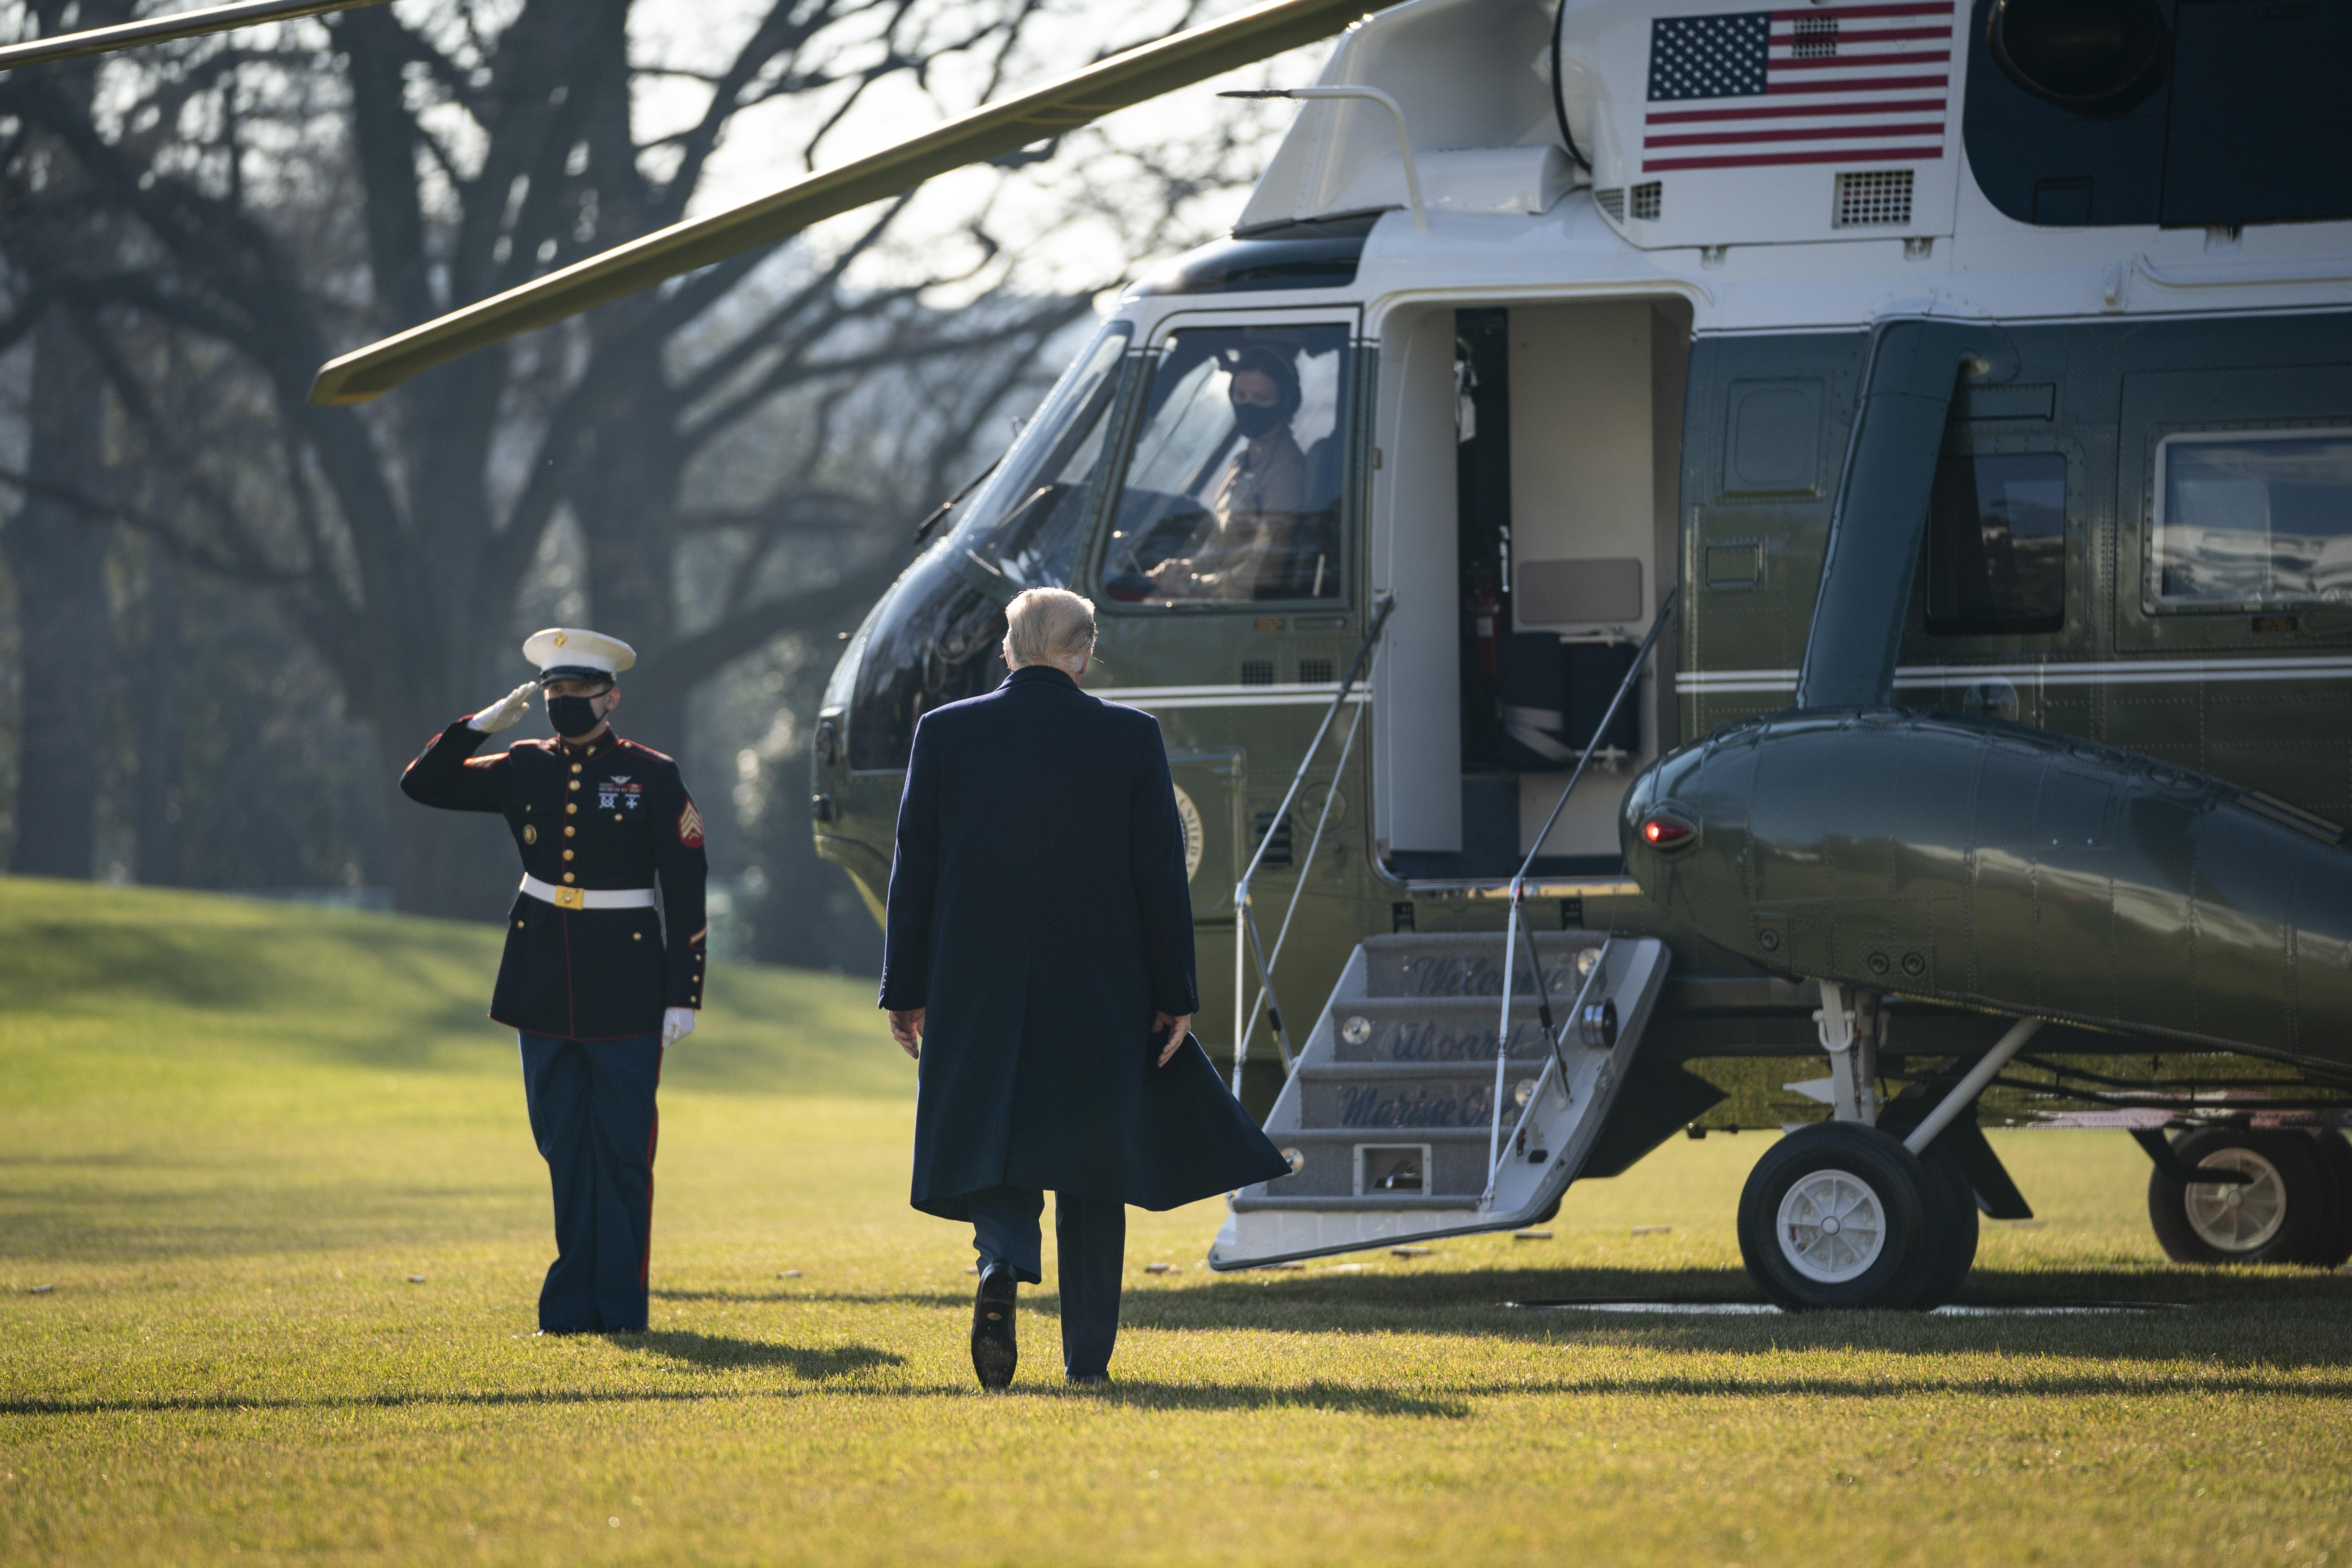 President Donald Trump walks to Marine One on the South Lawn of the White House on January 12, 2021 in Washington, D.C.